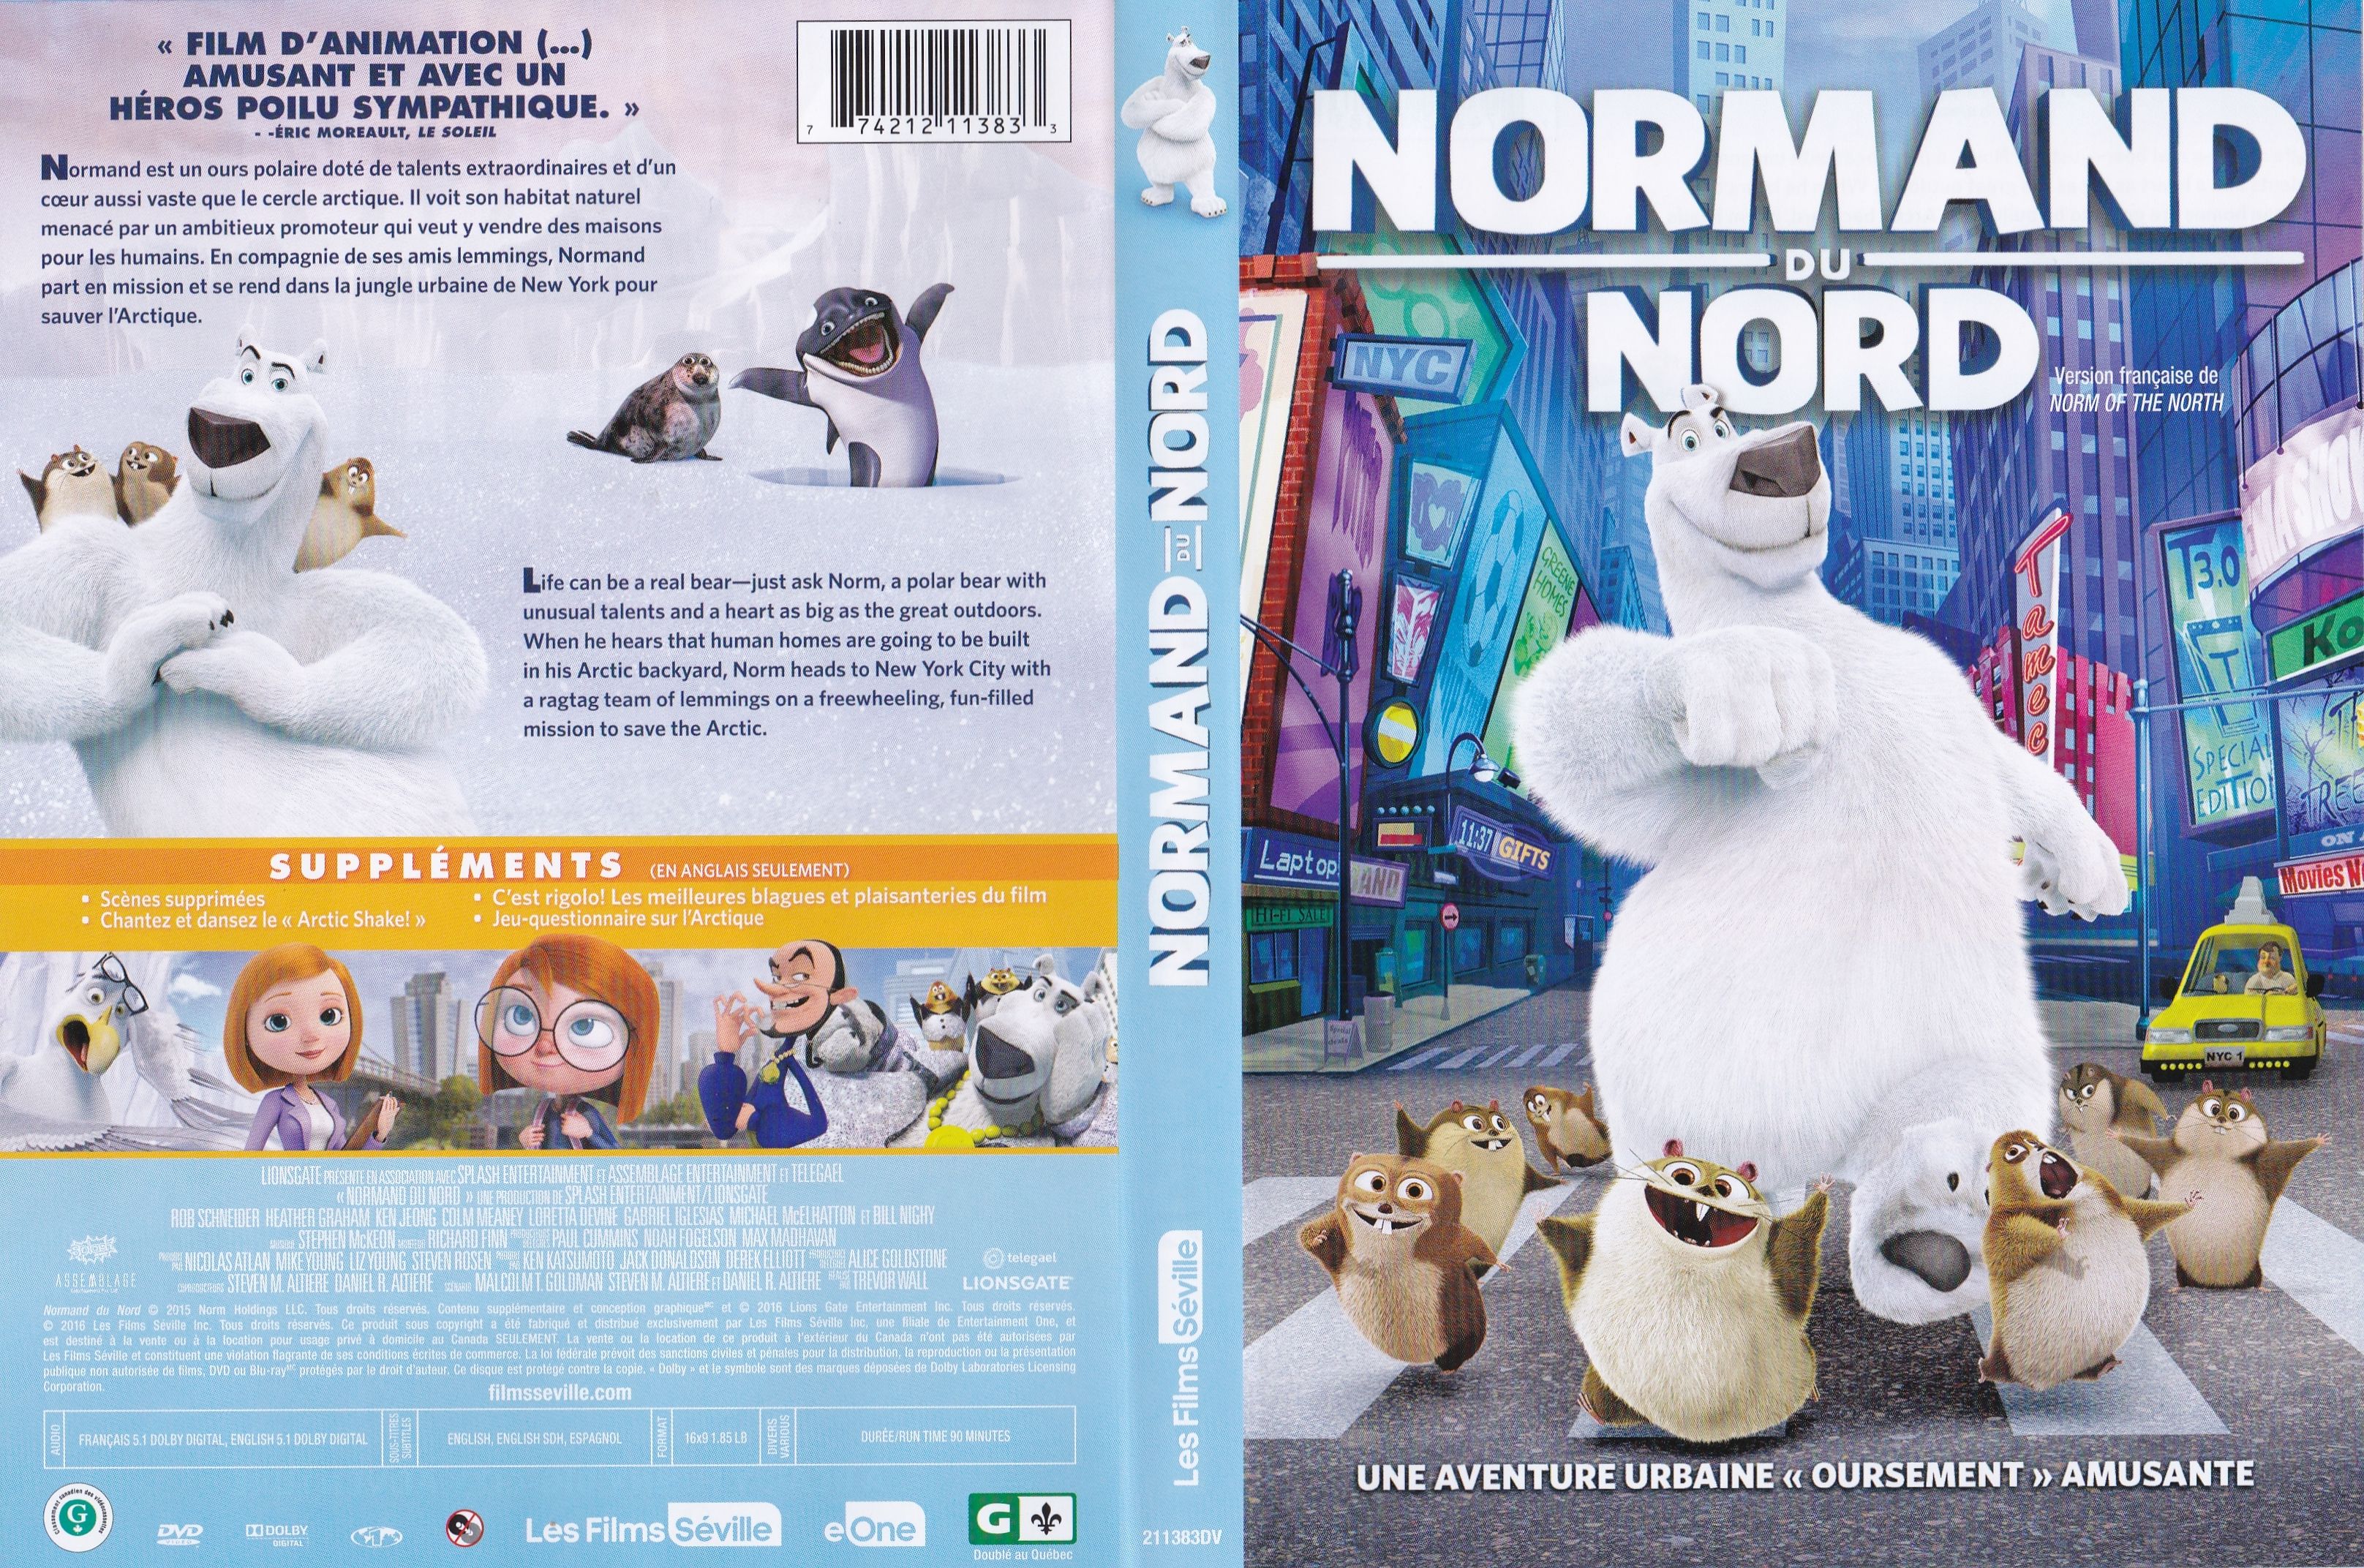 Jaquette DVD Normand du nord (canadienne) 